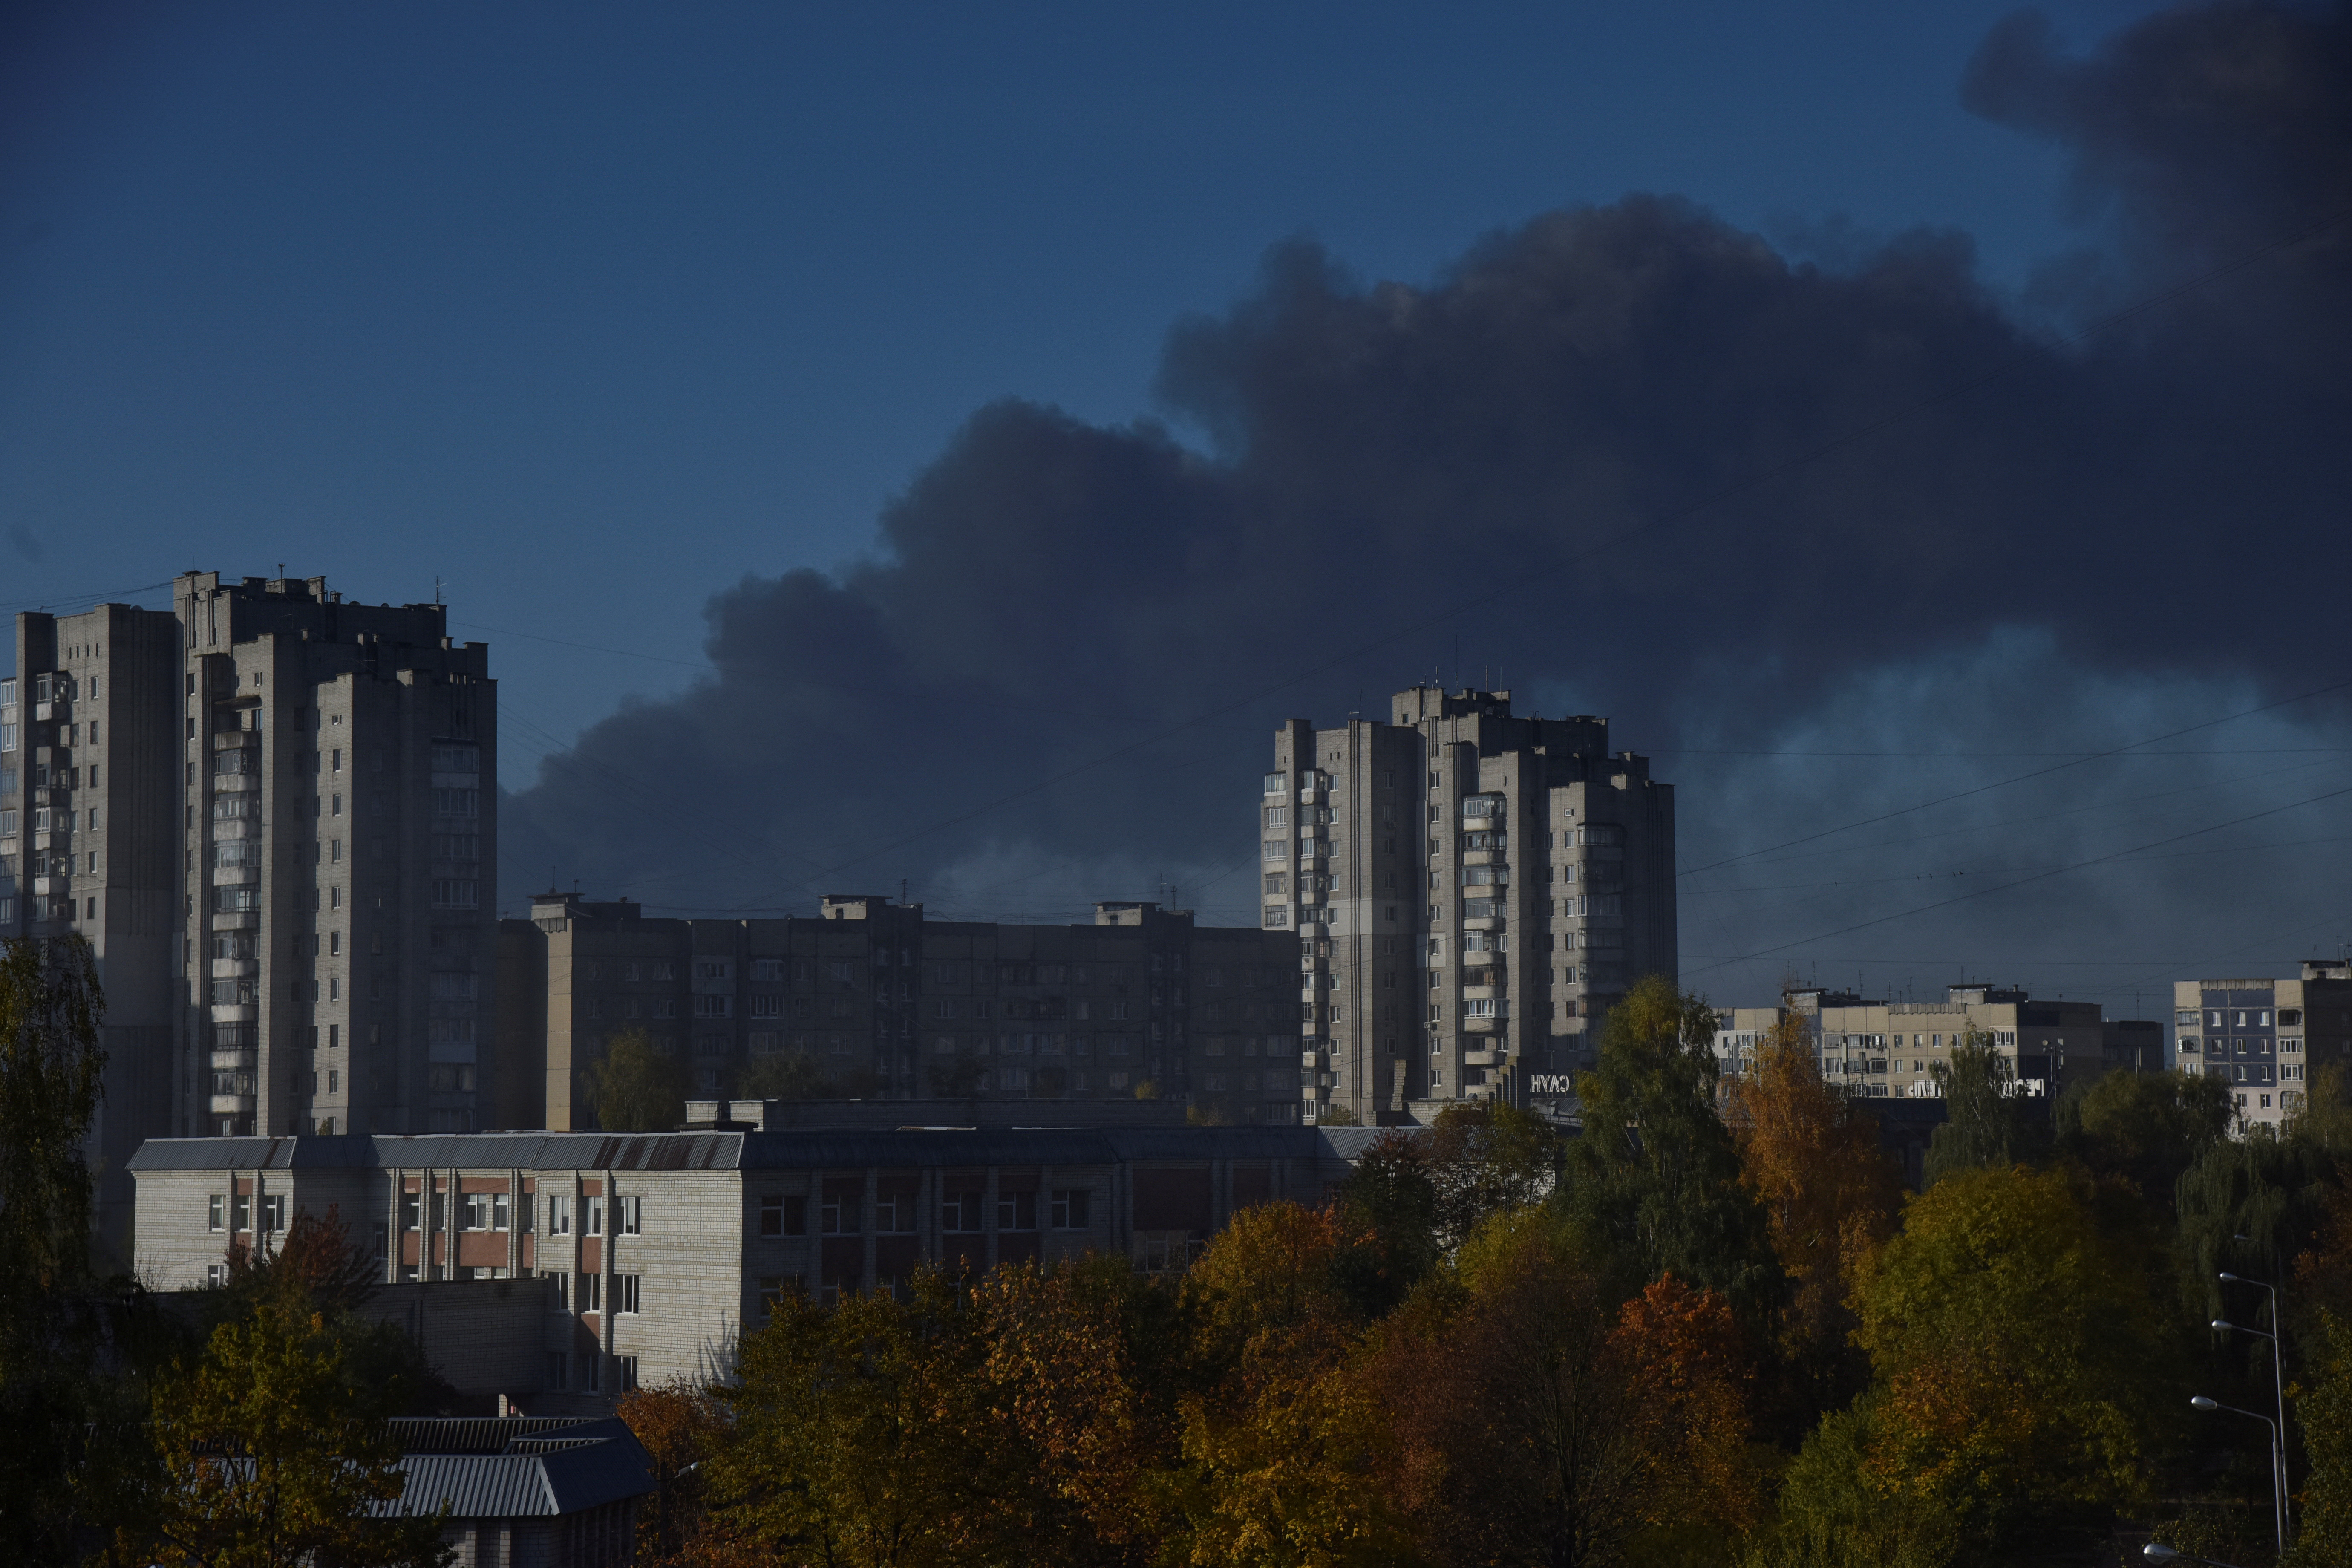 Columns of smoke are seen in the sky over Lviv after Russian airstrikes on Monday REUTERS/Pavlo Palamarchuk.